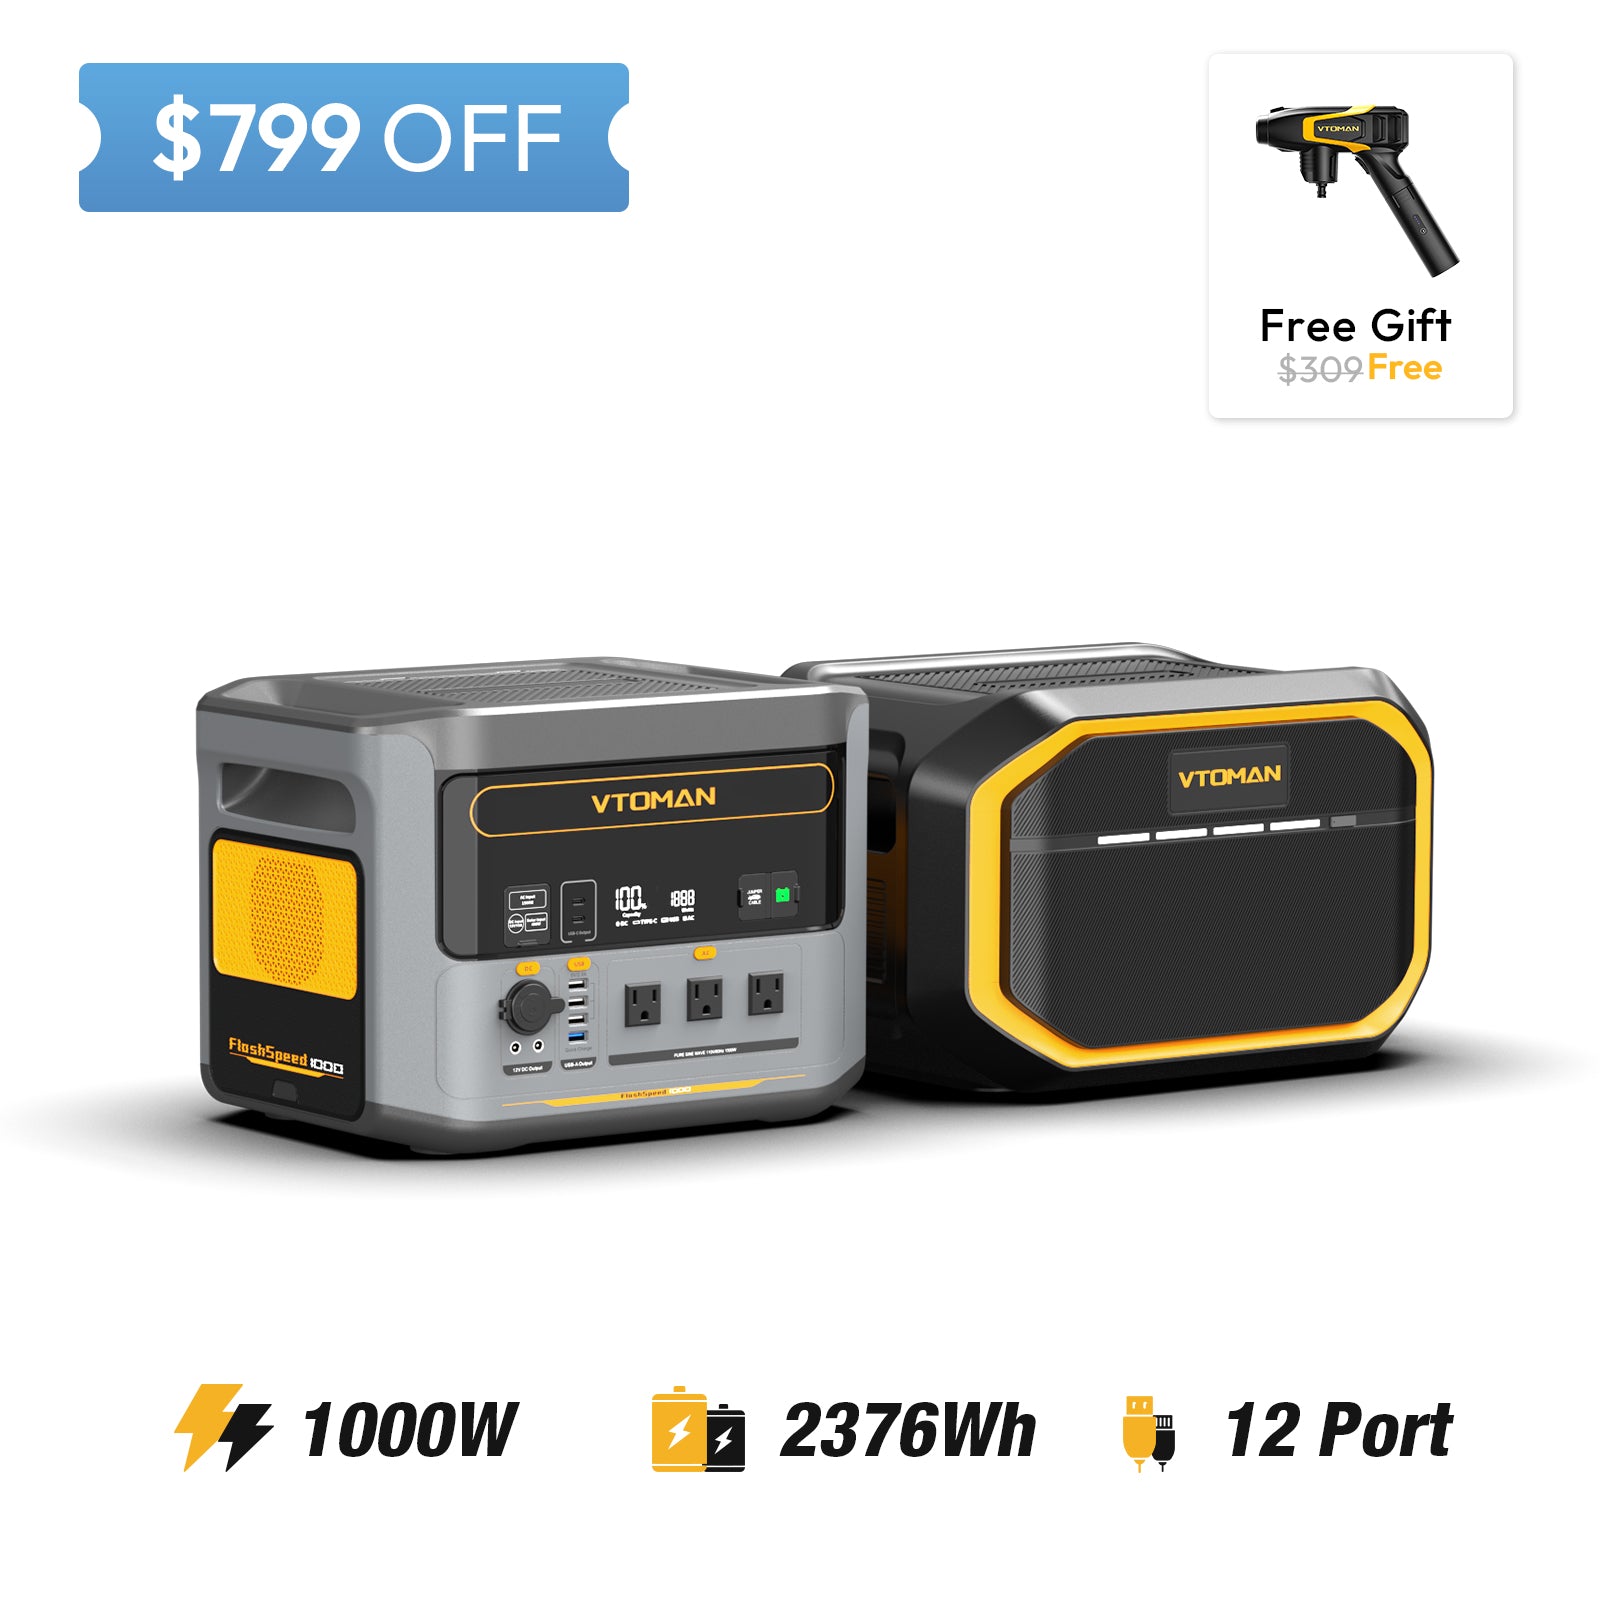 FlashSpeed 1000 and 1548Wh extra battery save $799 in summer sale